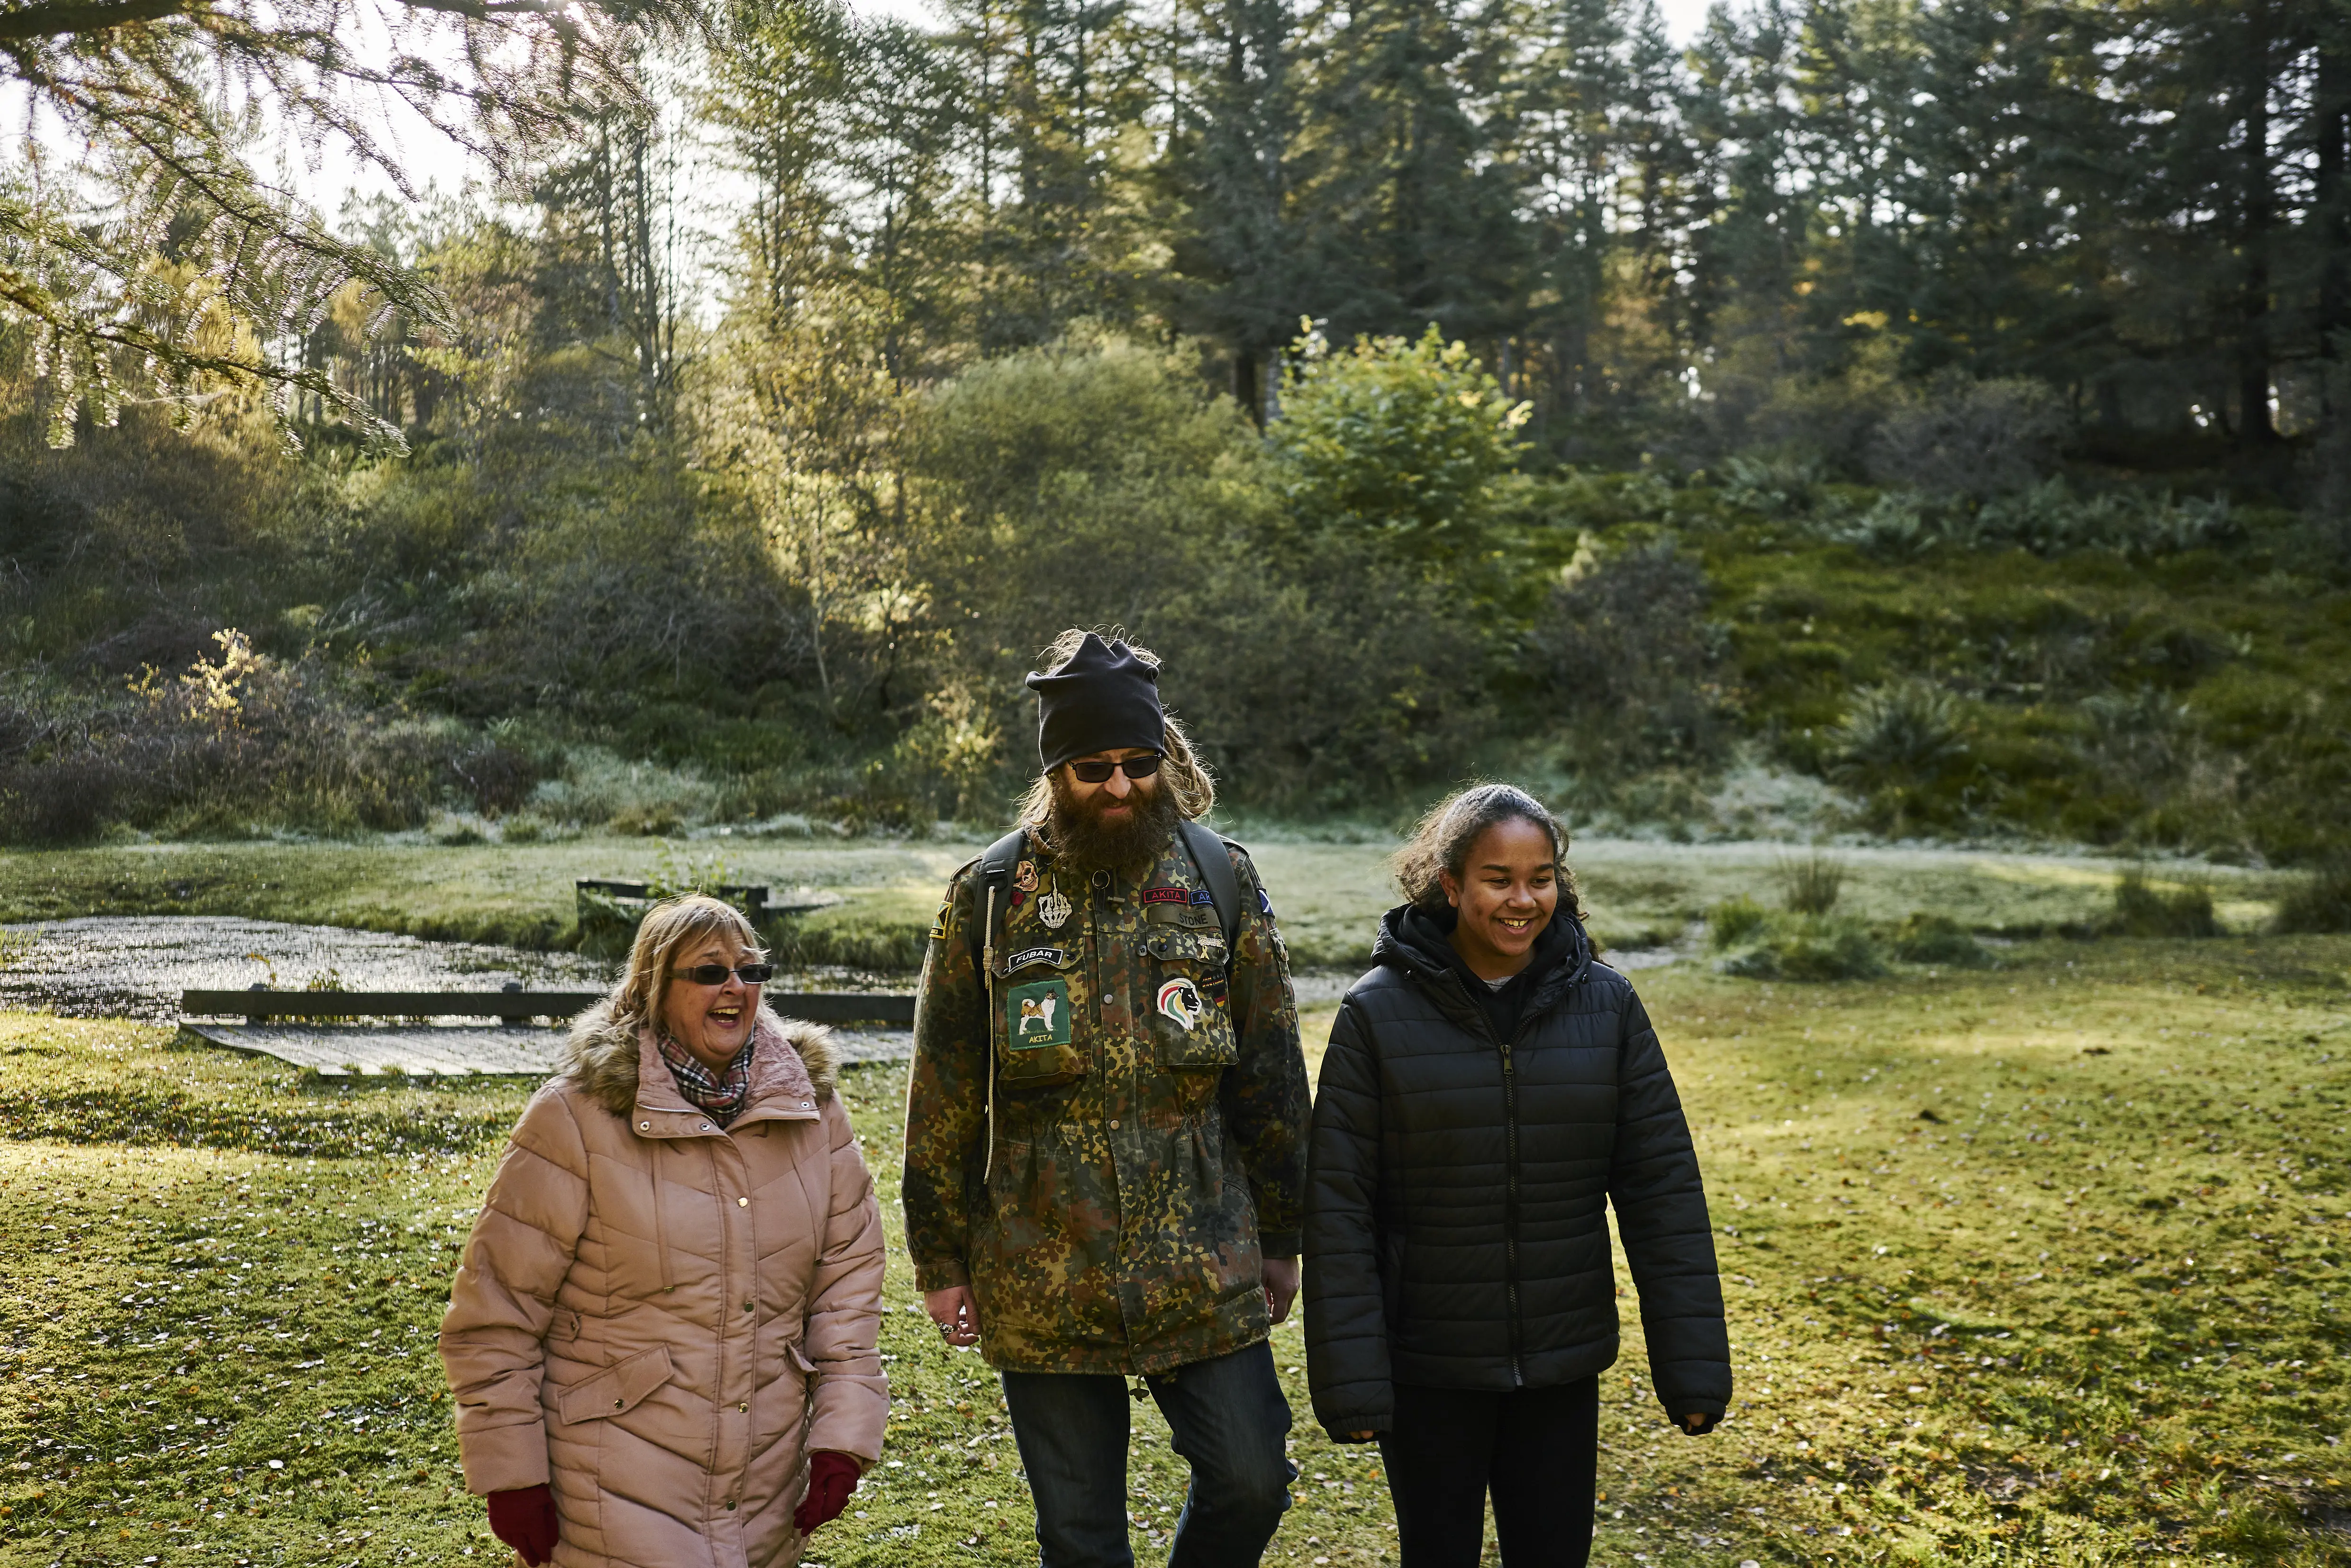 Teenage girl, man in combat jacket and dreadlocks and woman walking together with pond behind them, woodland trail, Aldie Burn forest, near Tain.